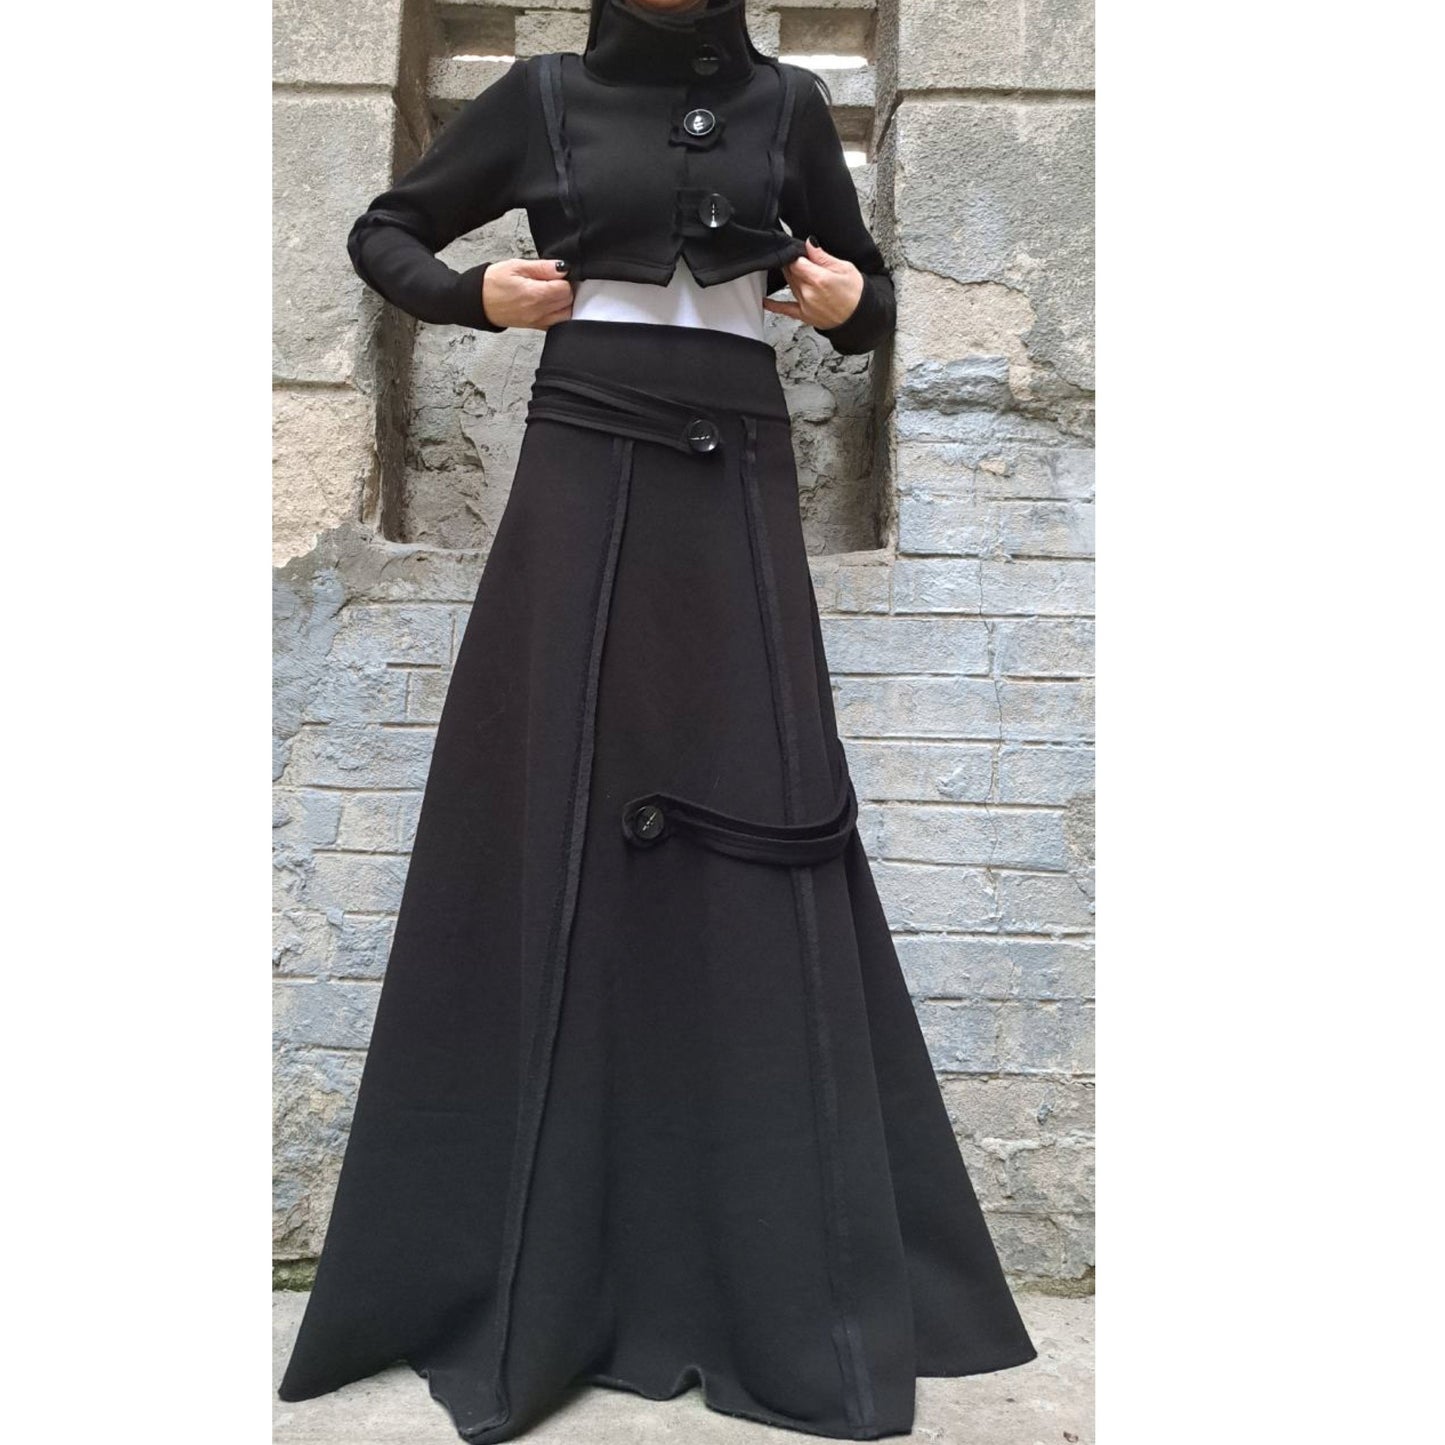 New Outwear Woman Black Outfit - Handmade clothing from AngelBySilvia - Top Designer Brands 